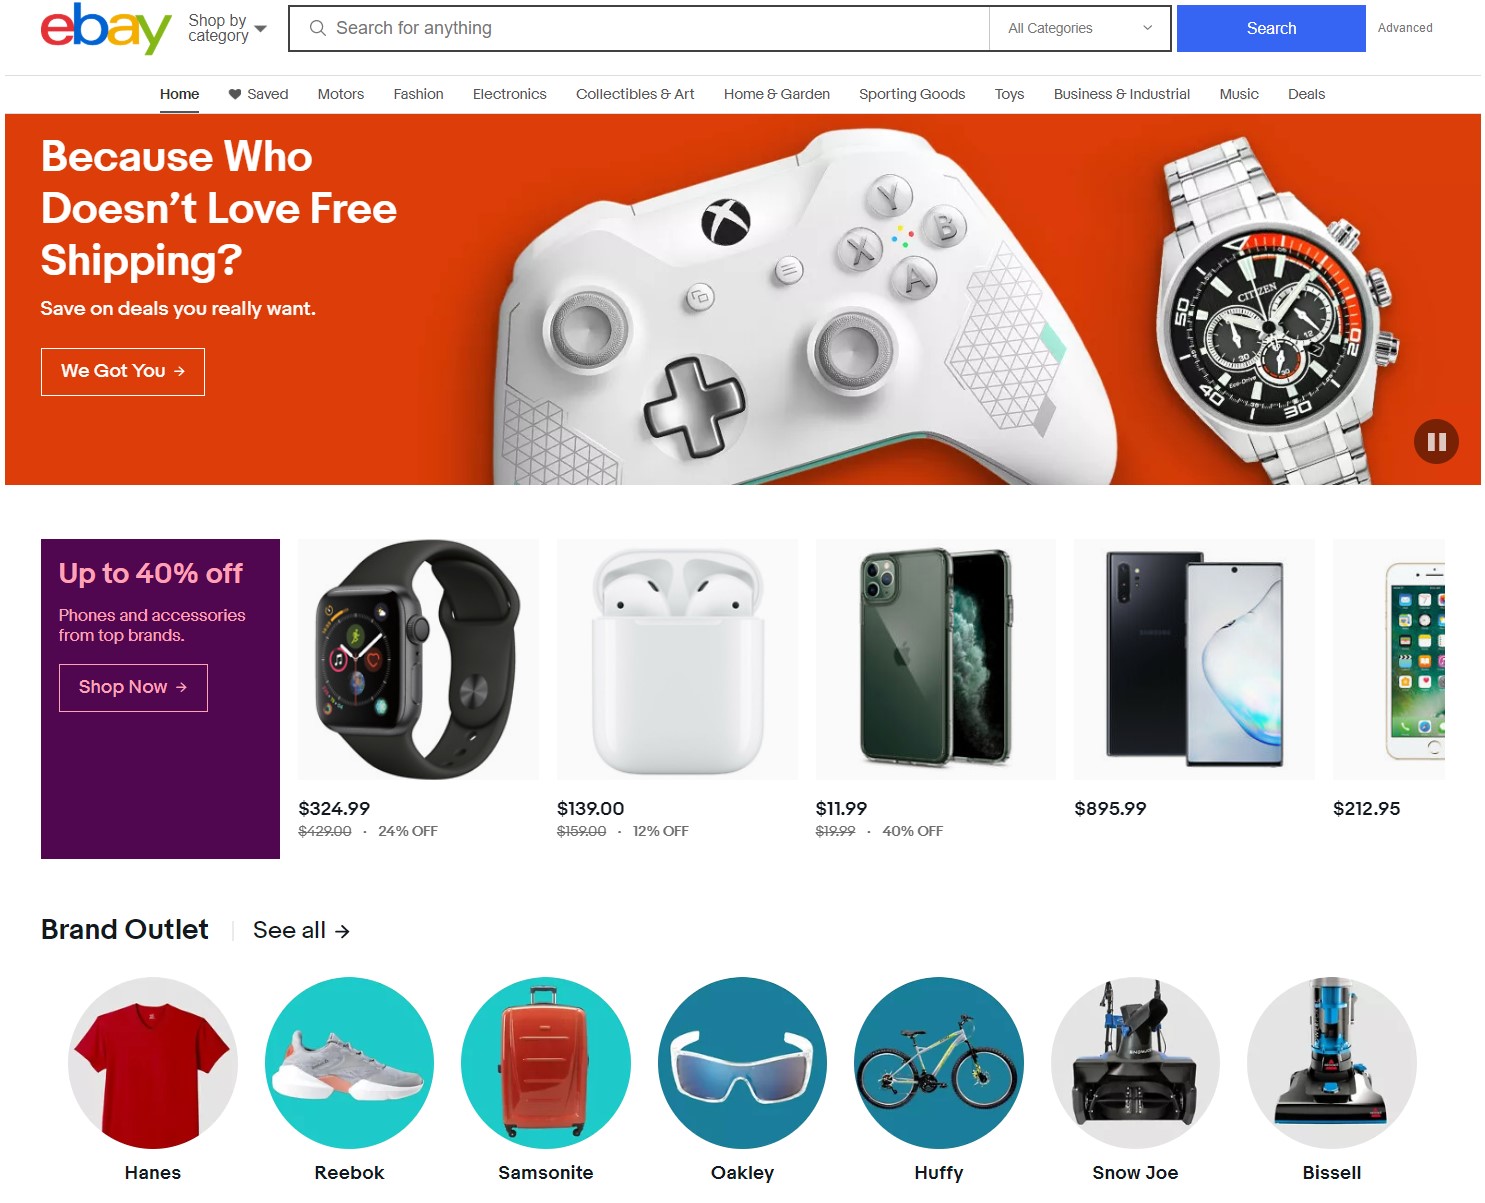 ebay home page 